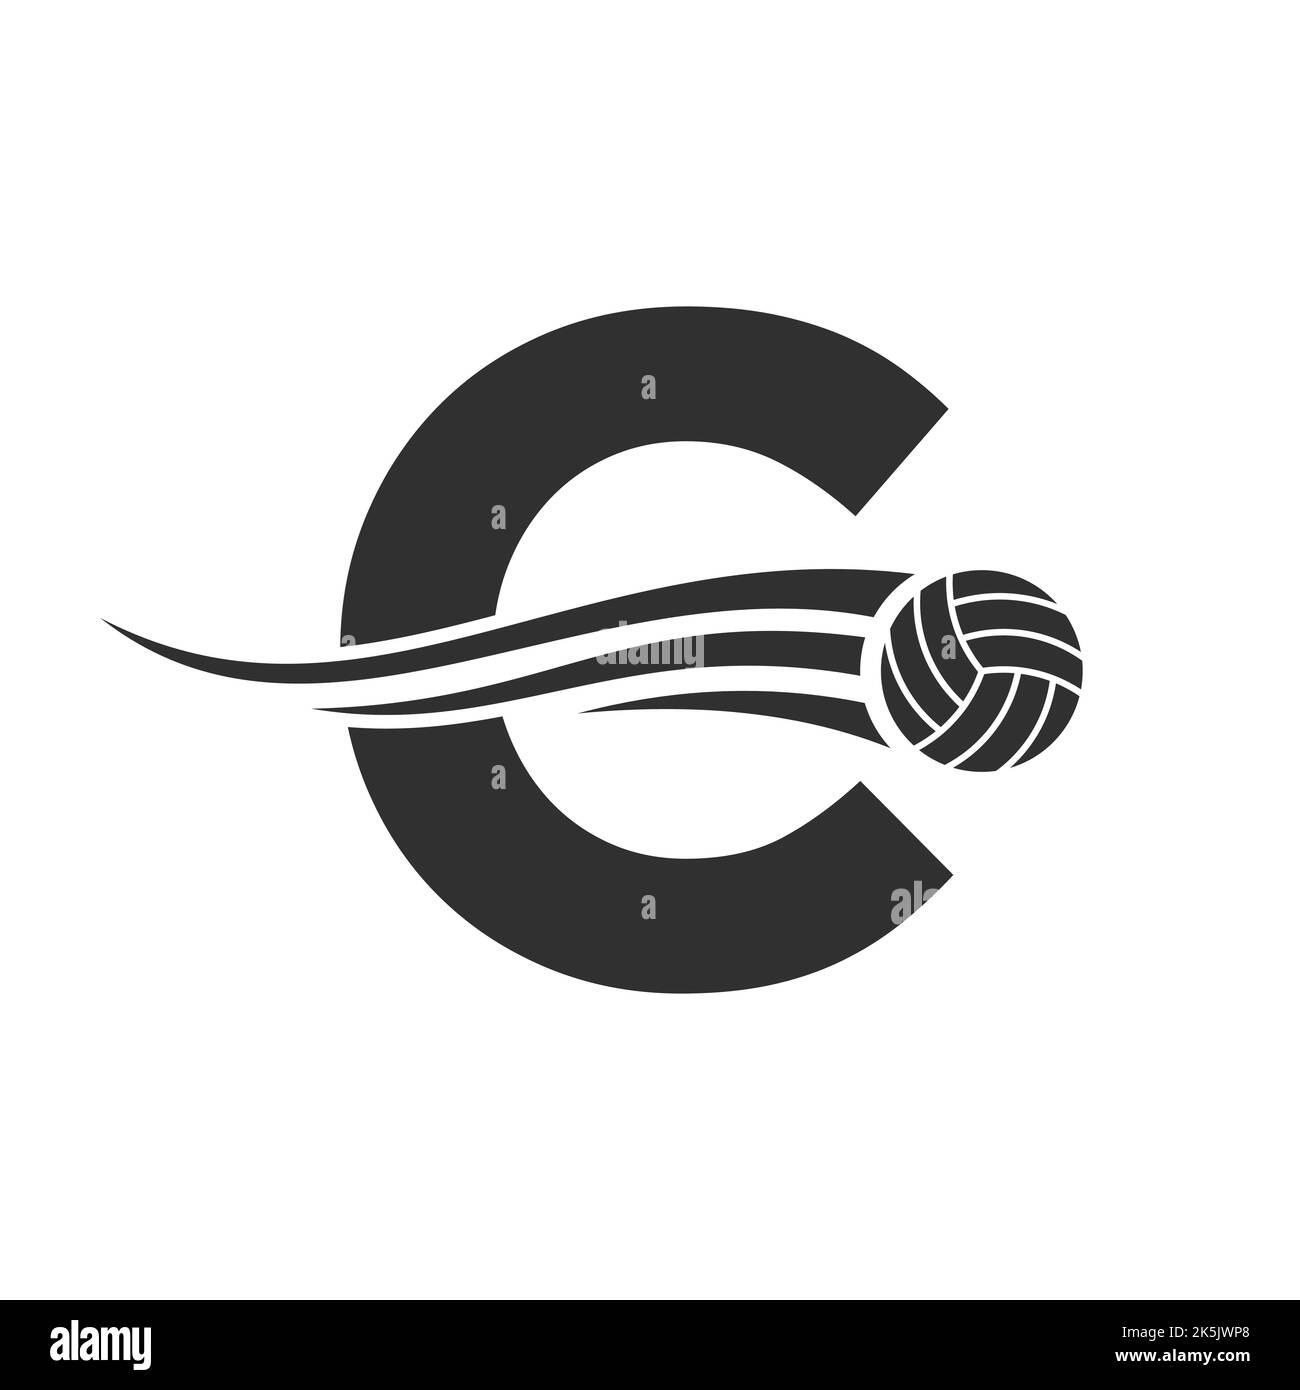 Letter C Volleyball Logo Design For Volley Ball Club Symbol Vector Template. Volleyball Sign Template Stock Vector